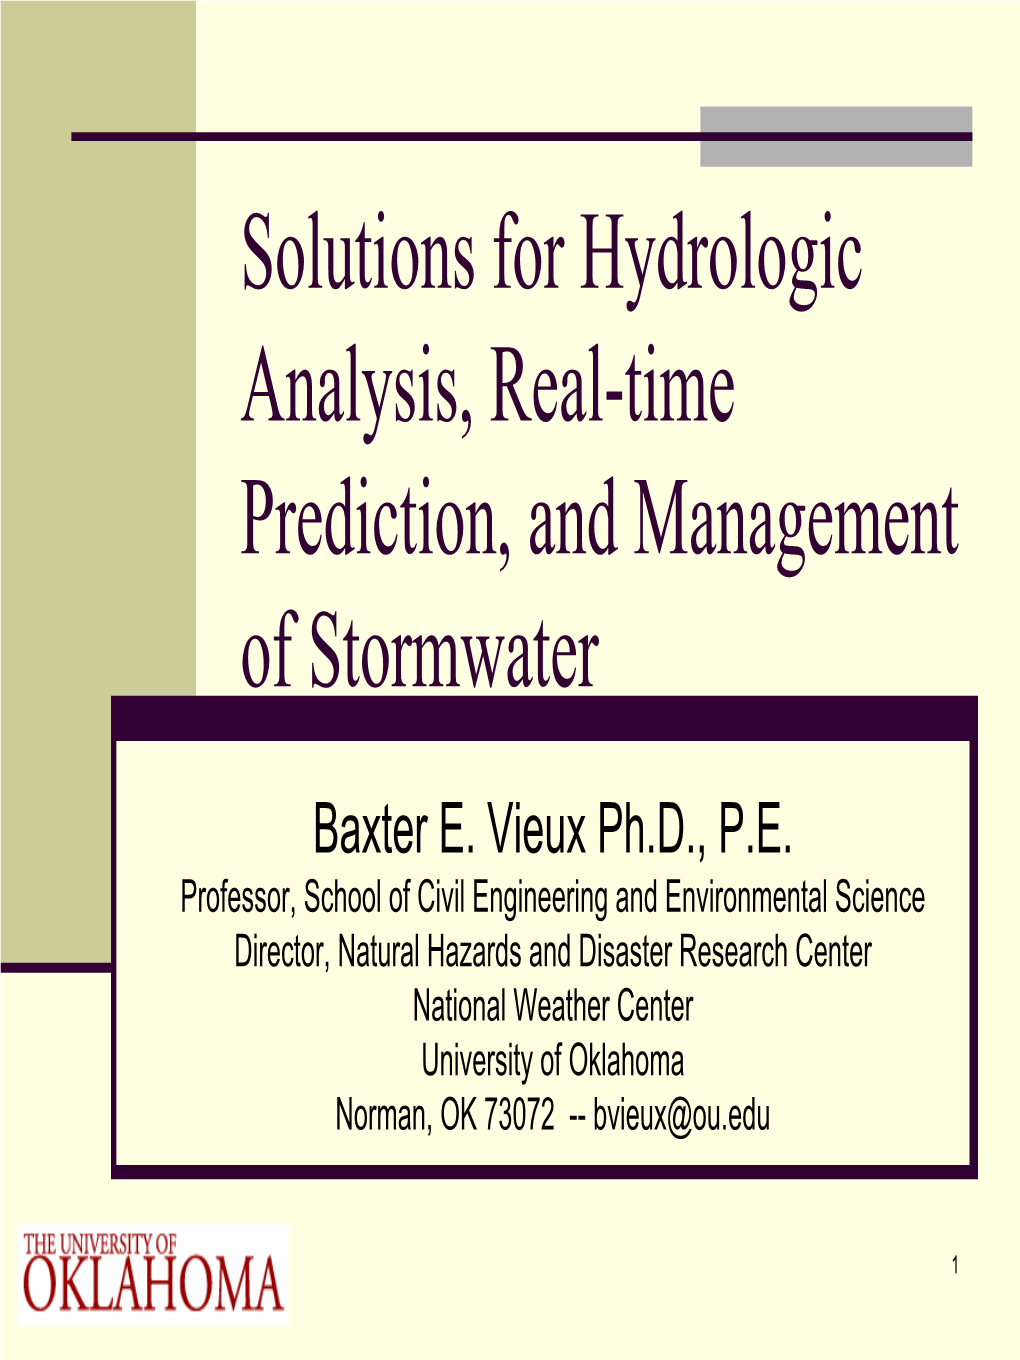 Solutions for Hydrologic Analysis, Real-Time Prediction, and Management of Stormwater